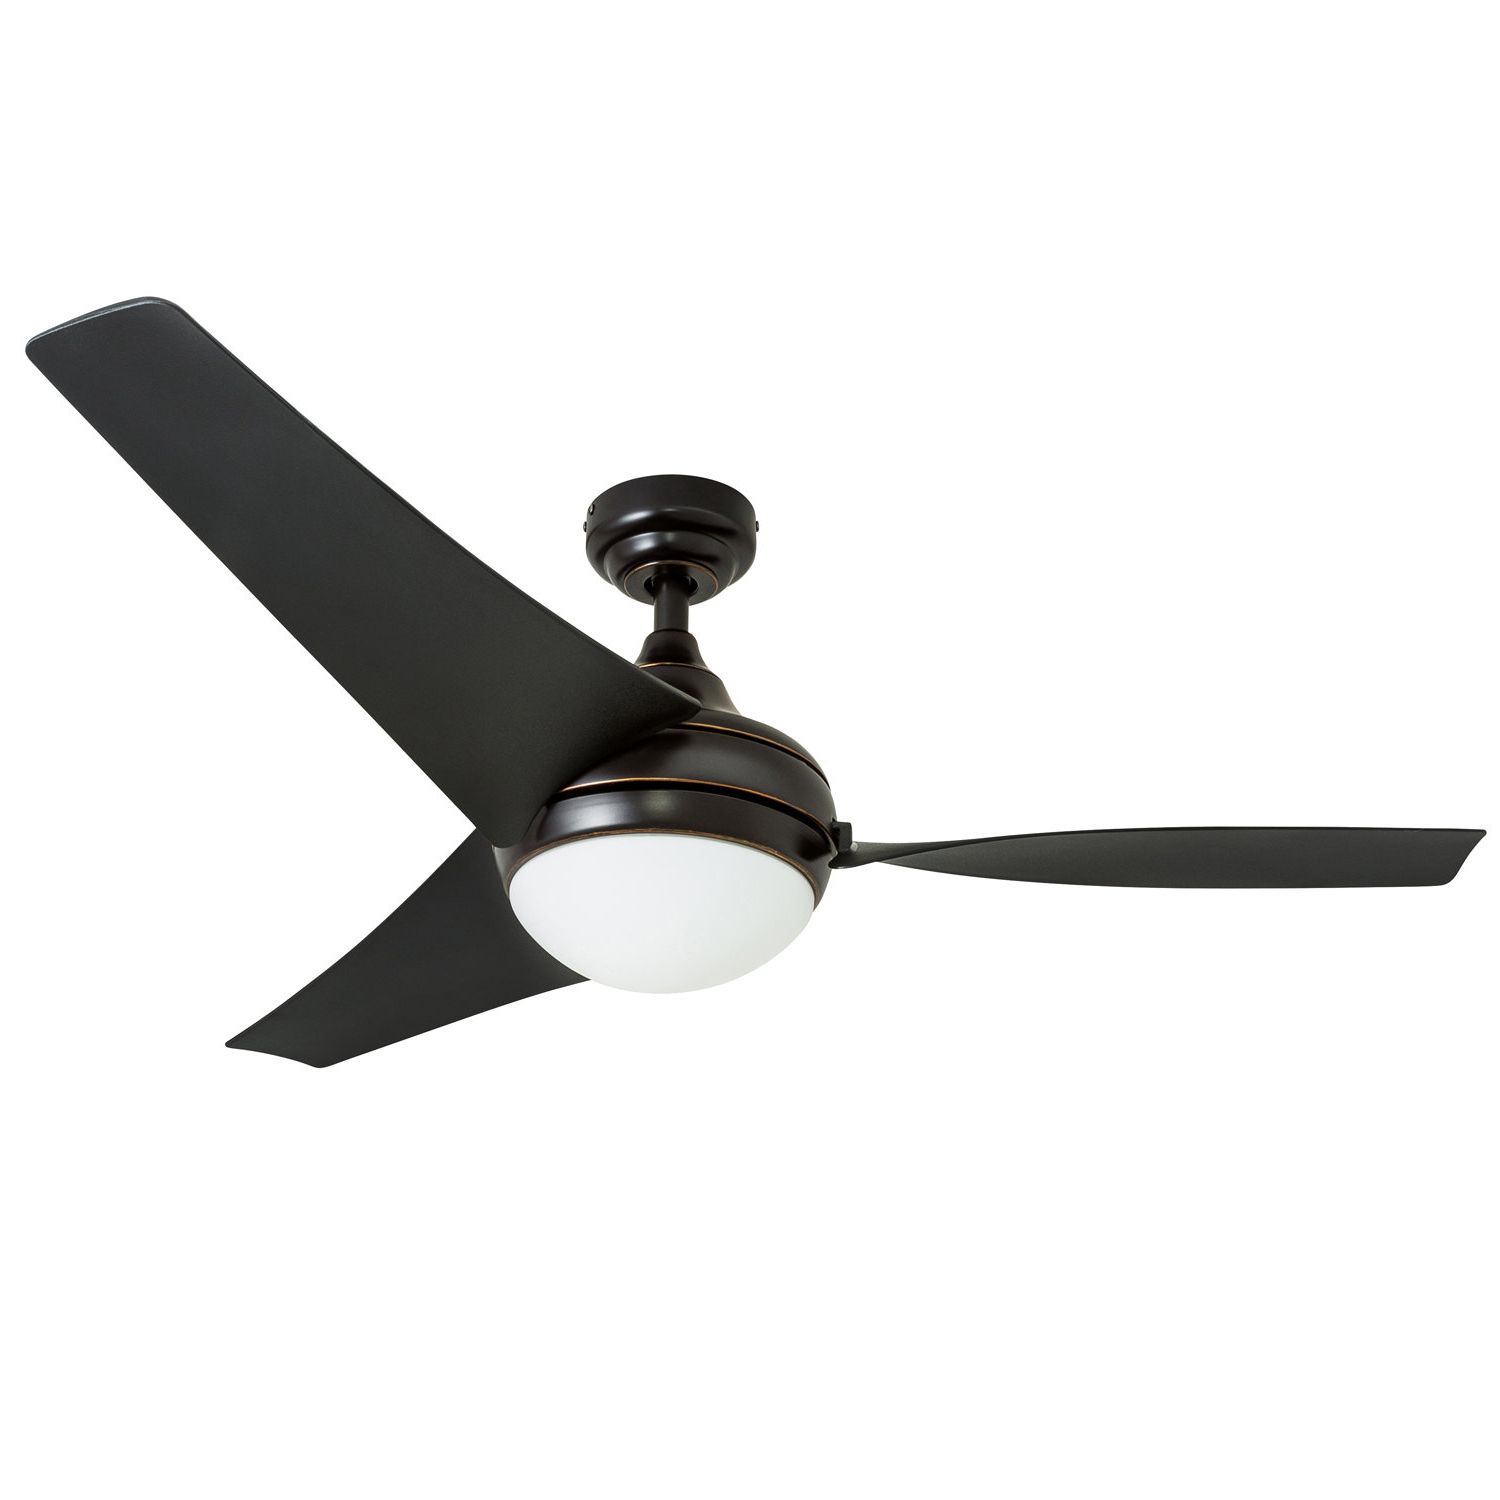 Latest 52" Schall 3 Blade Led Ceiling Fan With Remote Throughout Nikki 3 Blade Ceiling Fans (View 7 of 20)